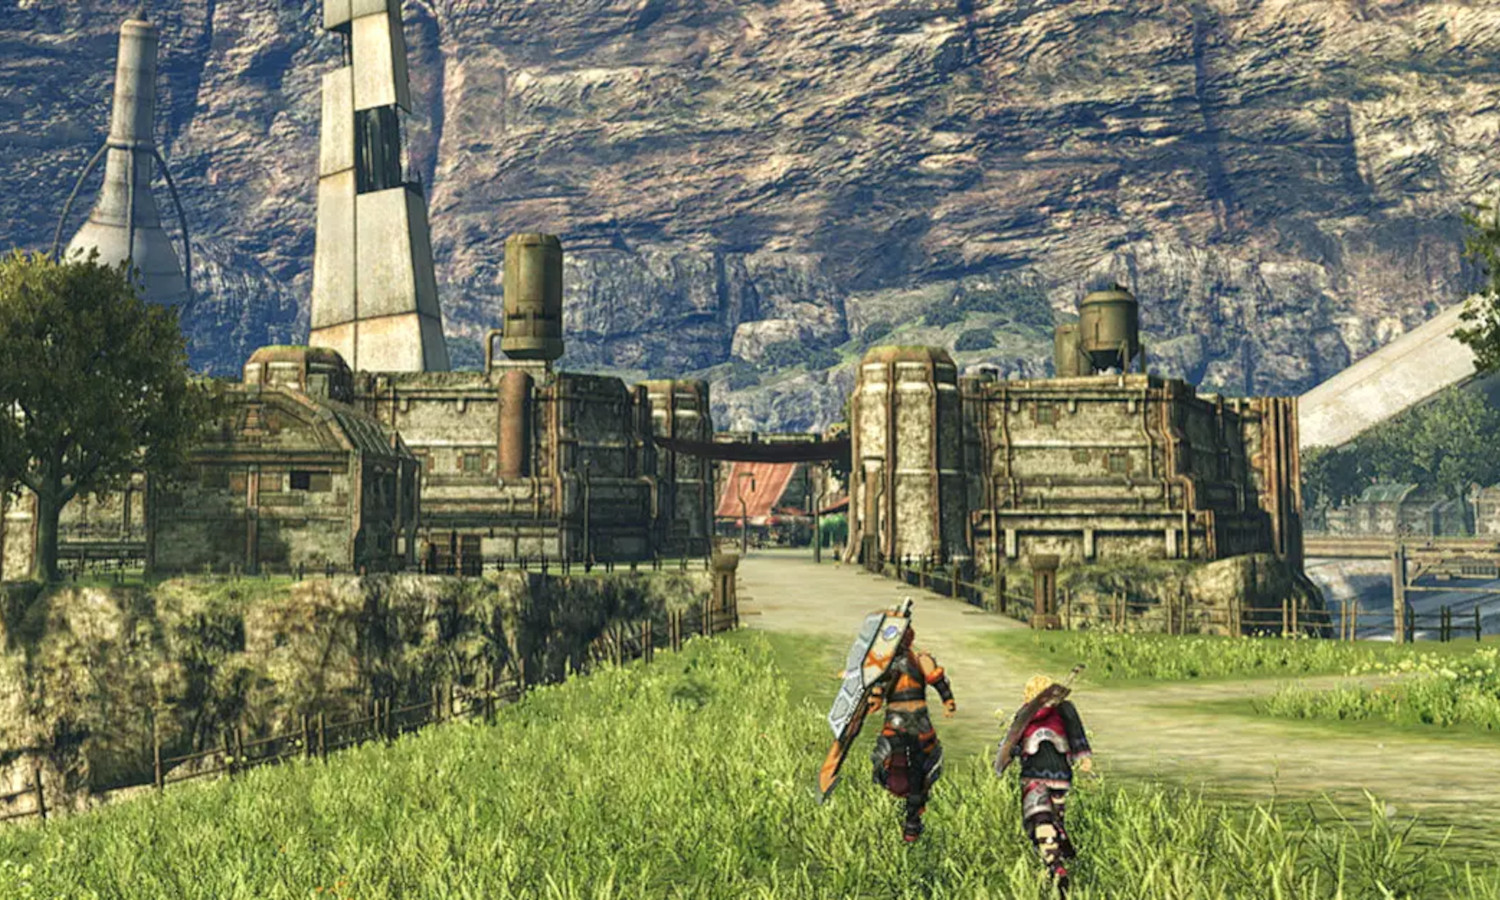 Xenoblade Chronicles Definitive Edition - My opinion (without spoilers) after 5 hours of play